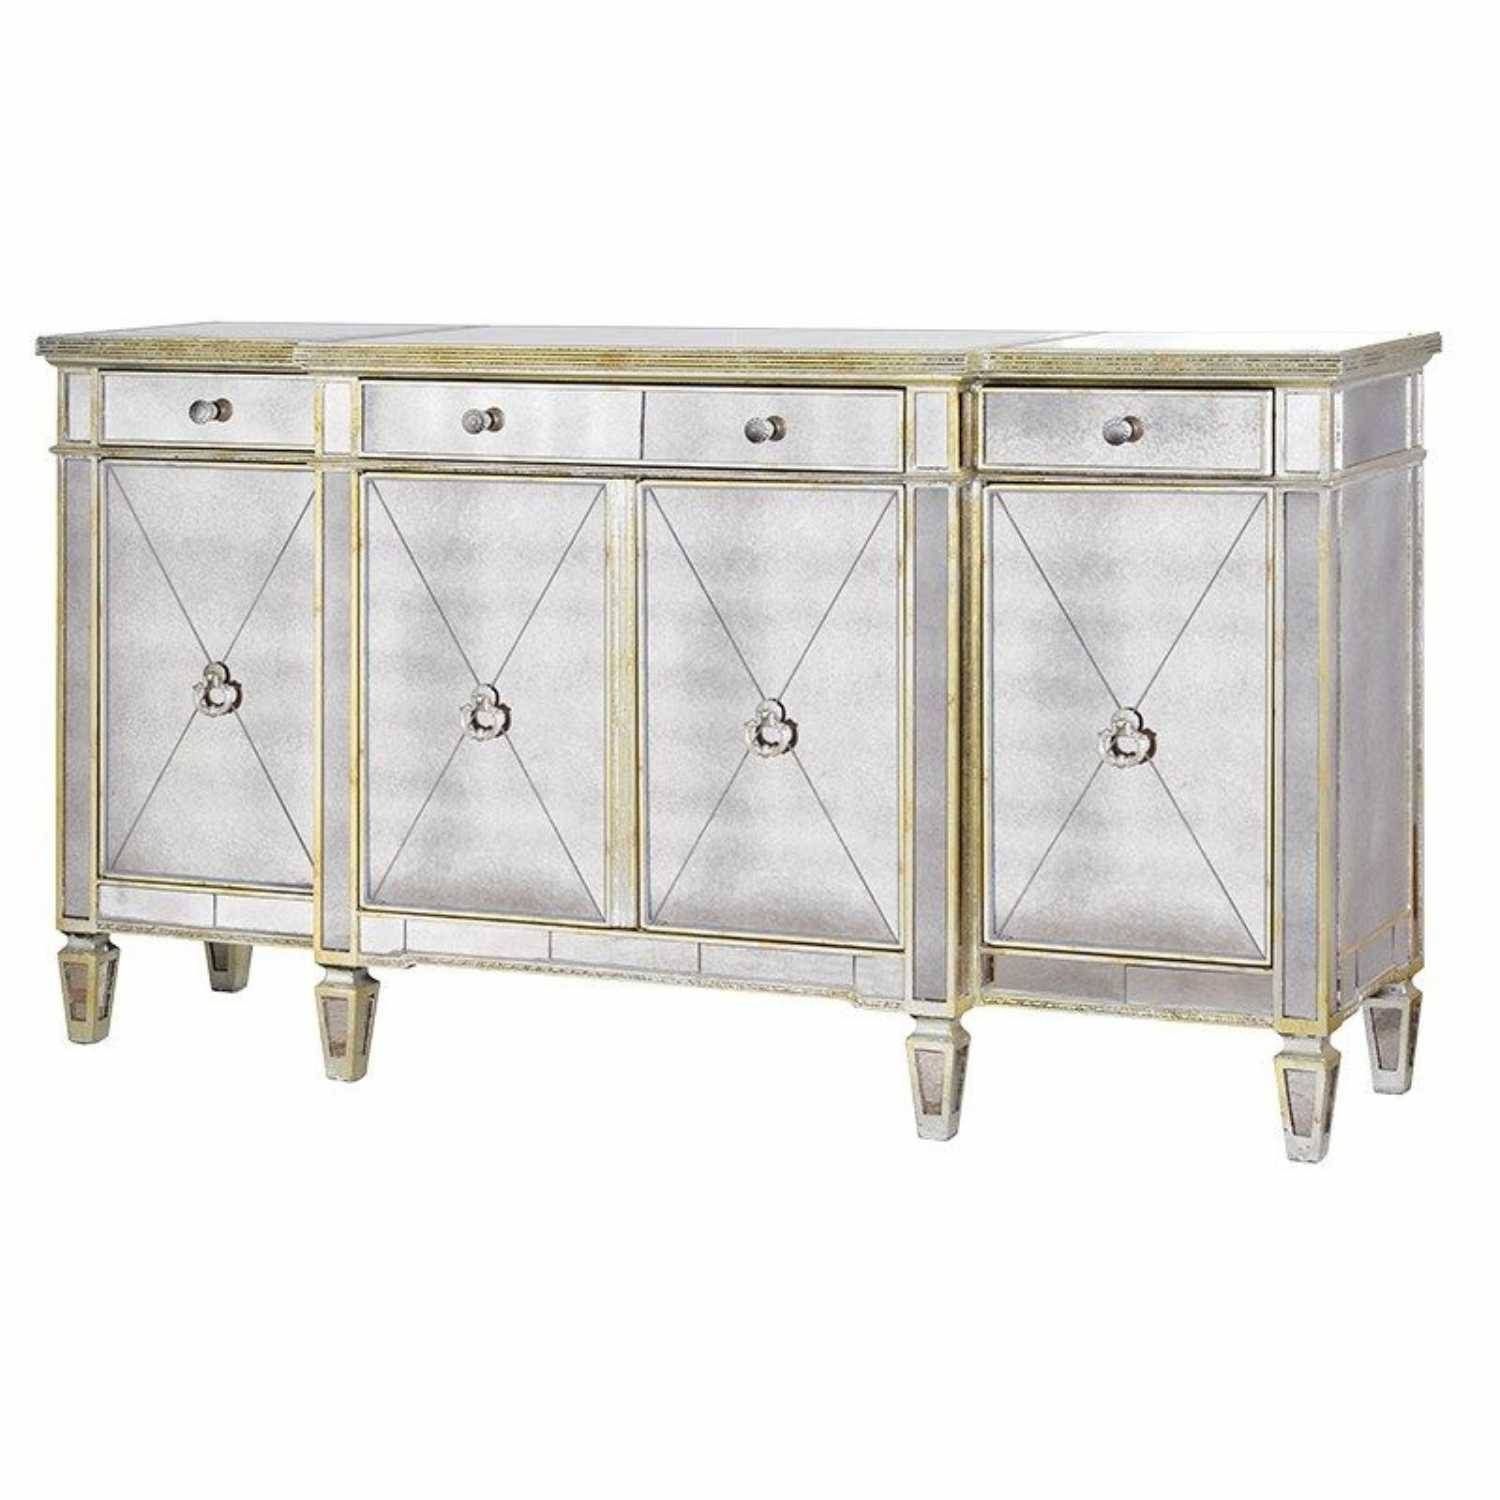 Large Antique Seville Venetian Mirrored Glass Sideboard 4 Door Within Venetian Mirrored Sideboard (Photo 7 of 20)